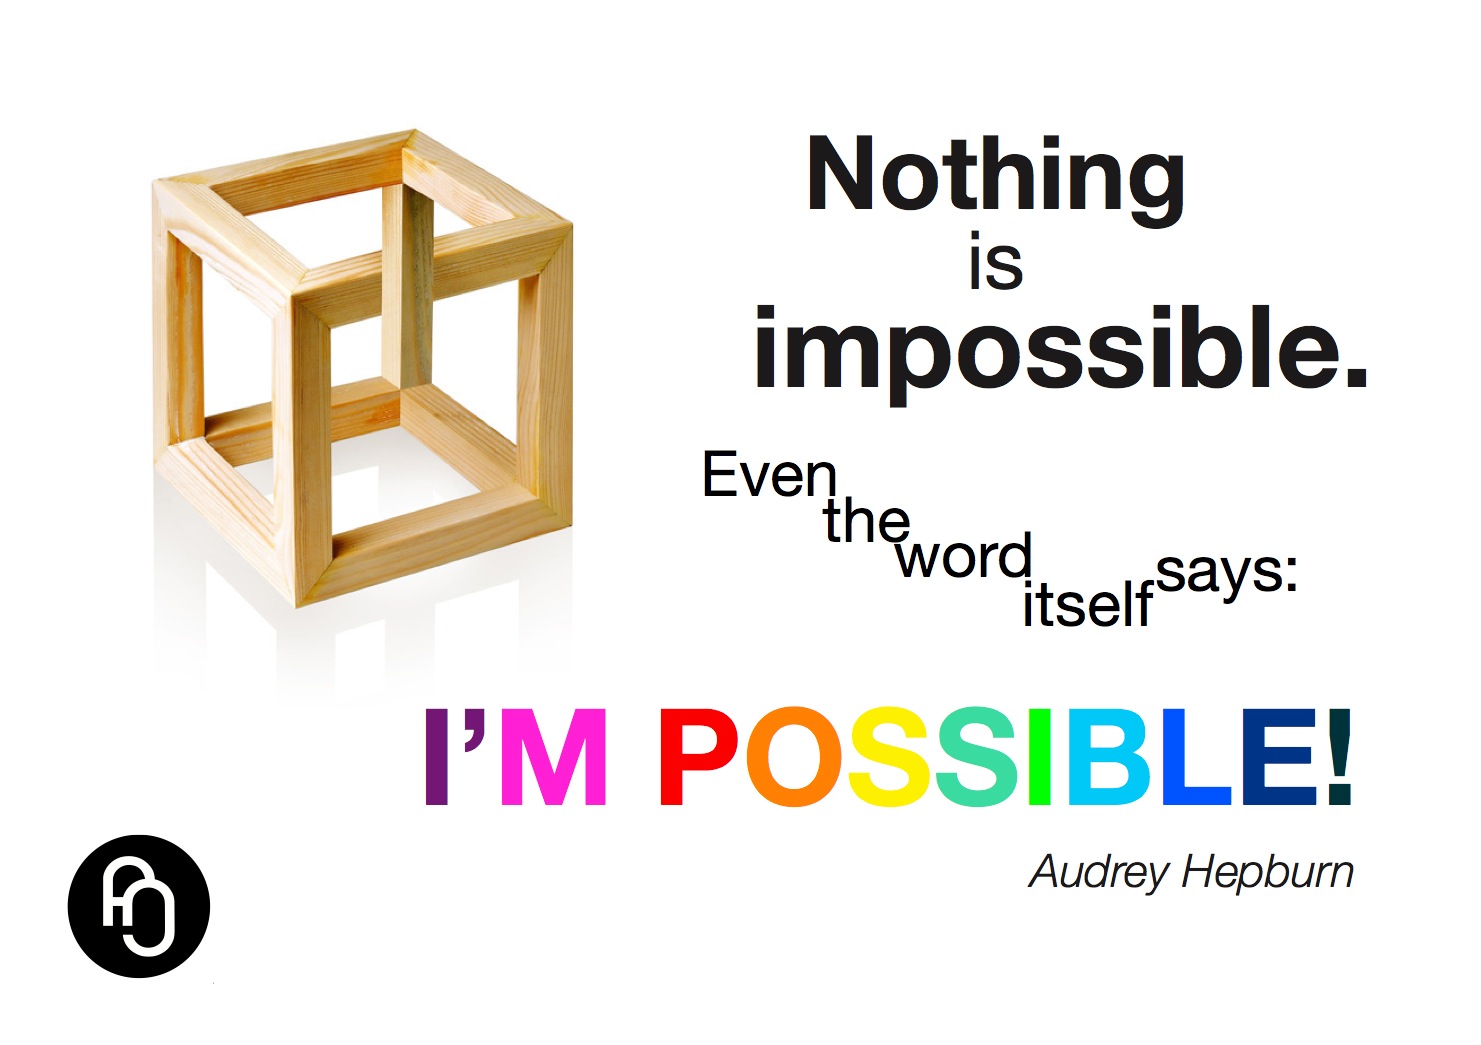 Imossible = I'm possible